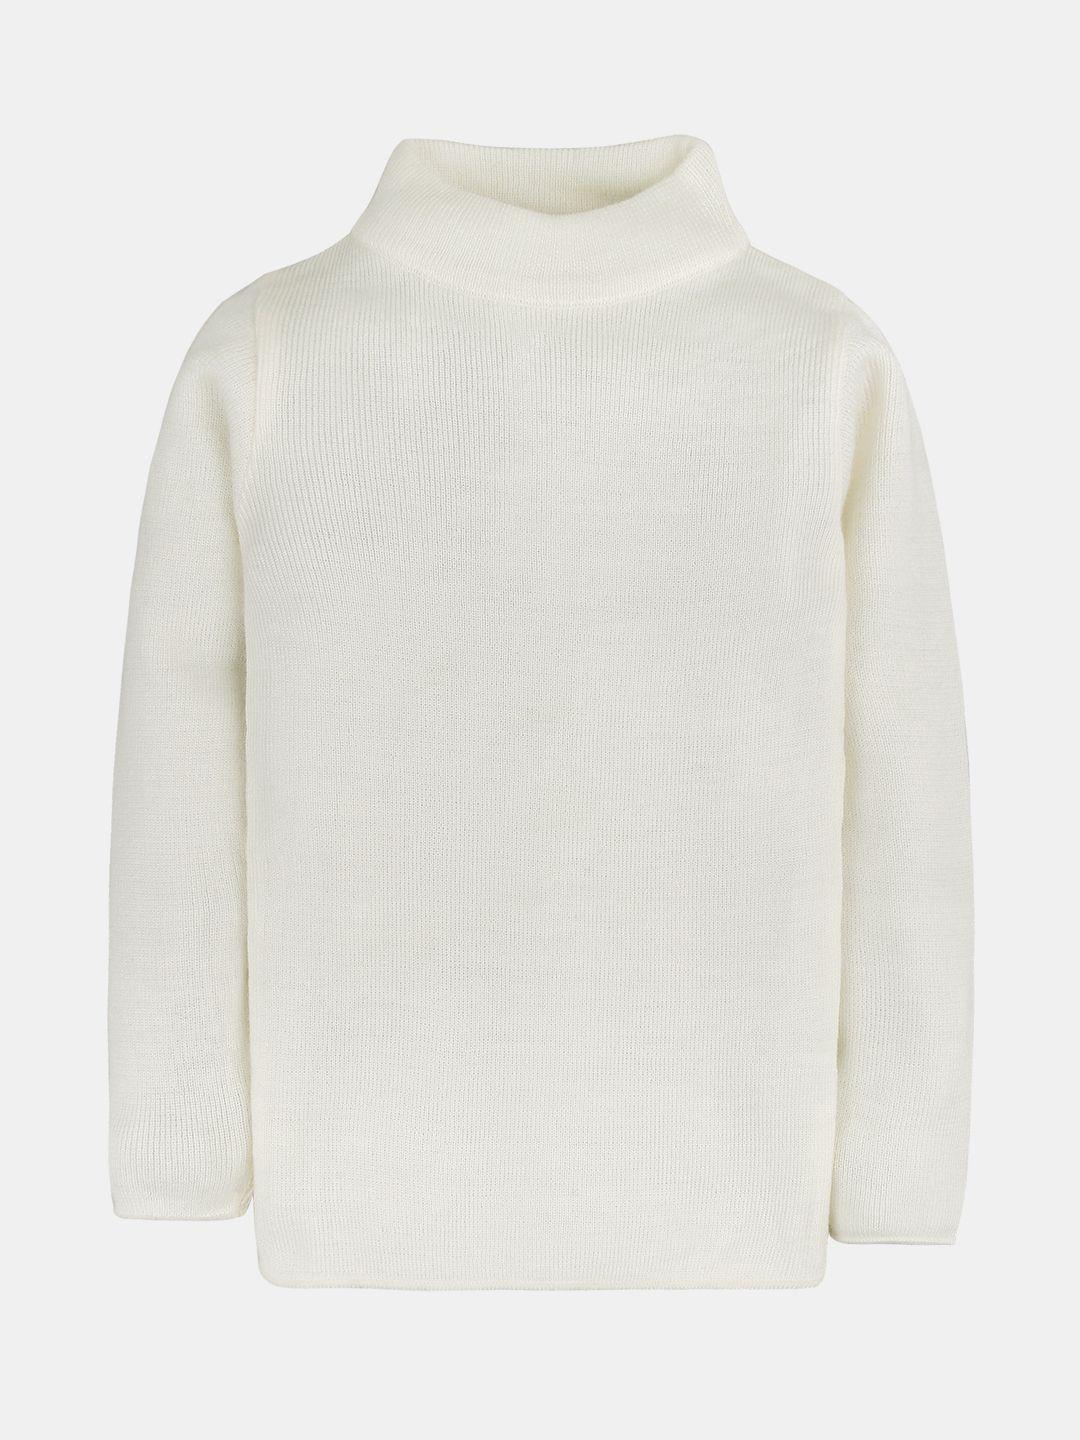 rvk kids off-white solid acrylic sweater